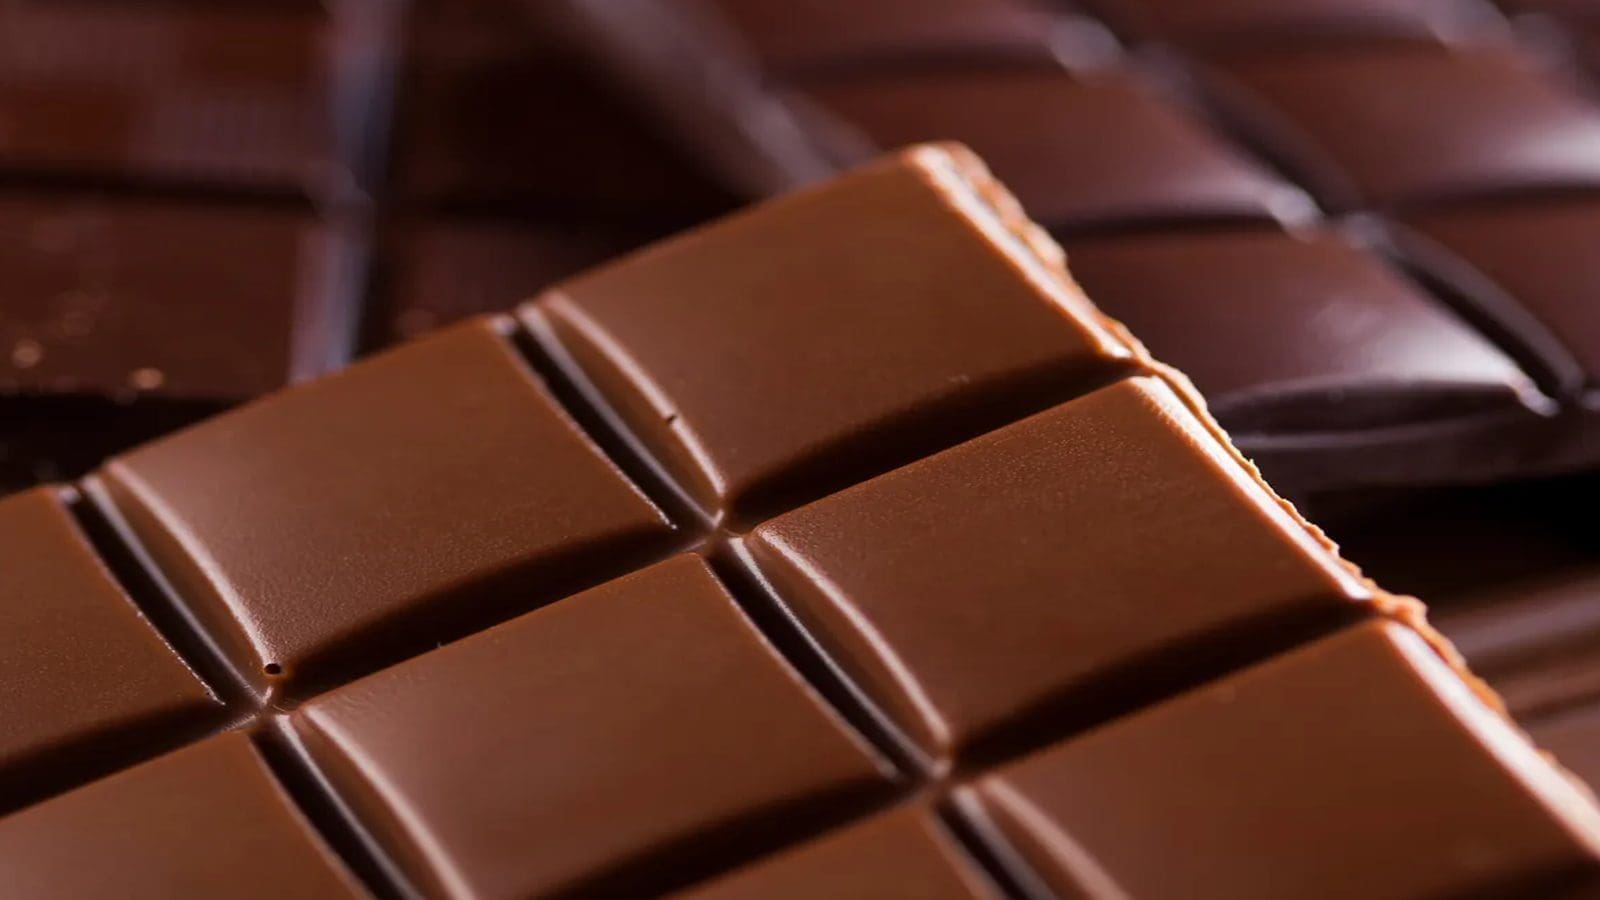 New report reveals alarming levels of heavy metals in chocolate products